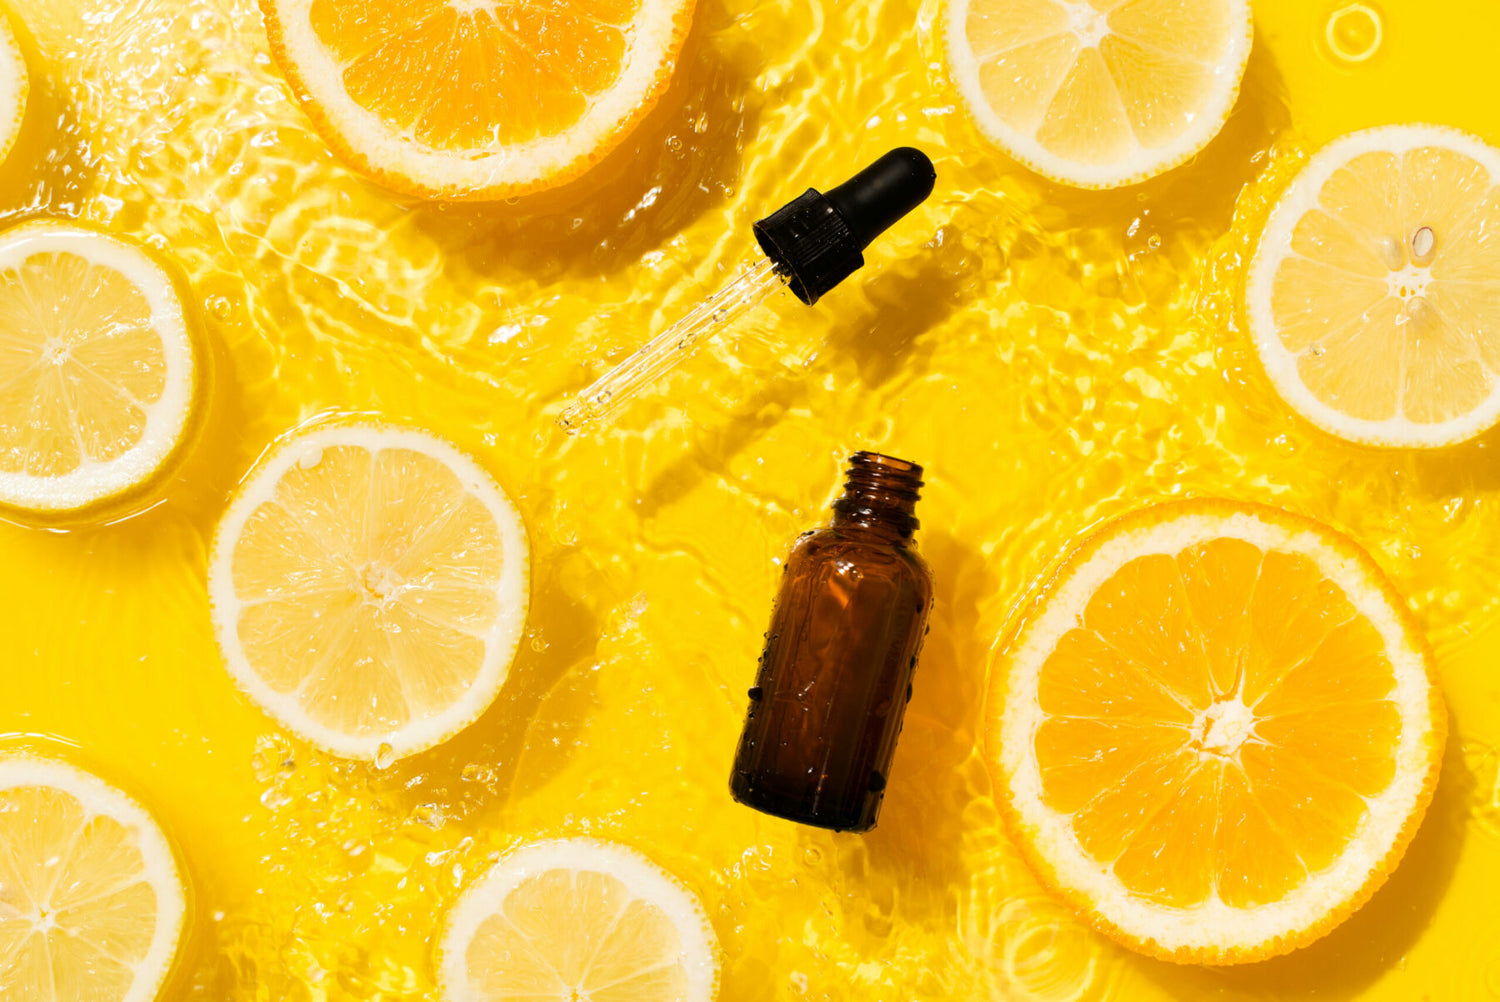 Find out how you can use Vitamin C for skin brightening. PillowtalkDerm talks about different types of Vitamin C and how it works wonders for acne prone skin.